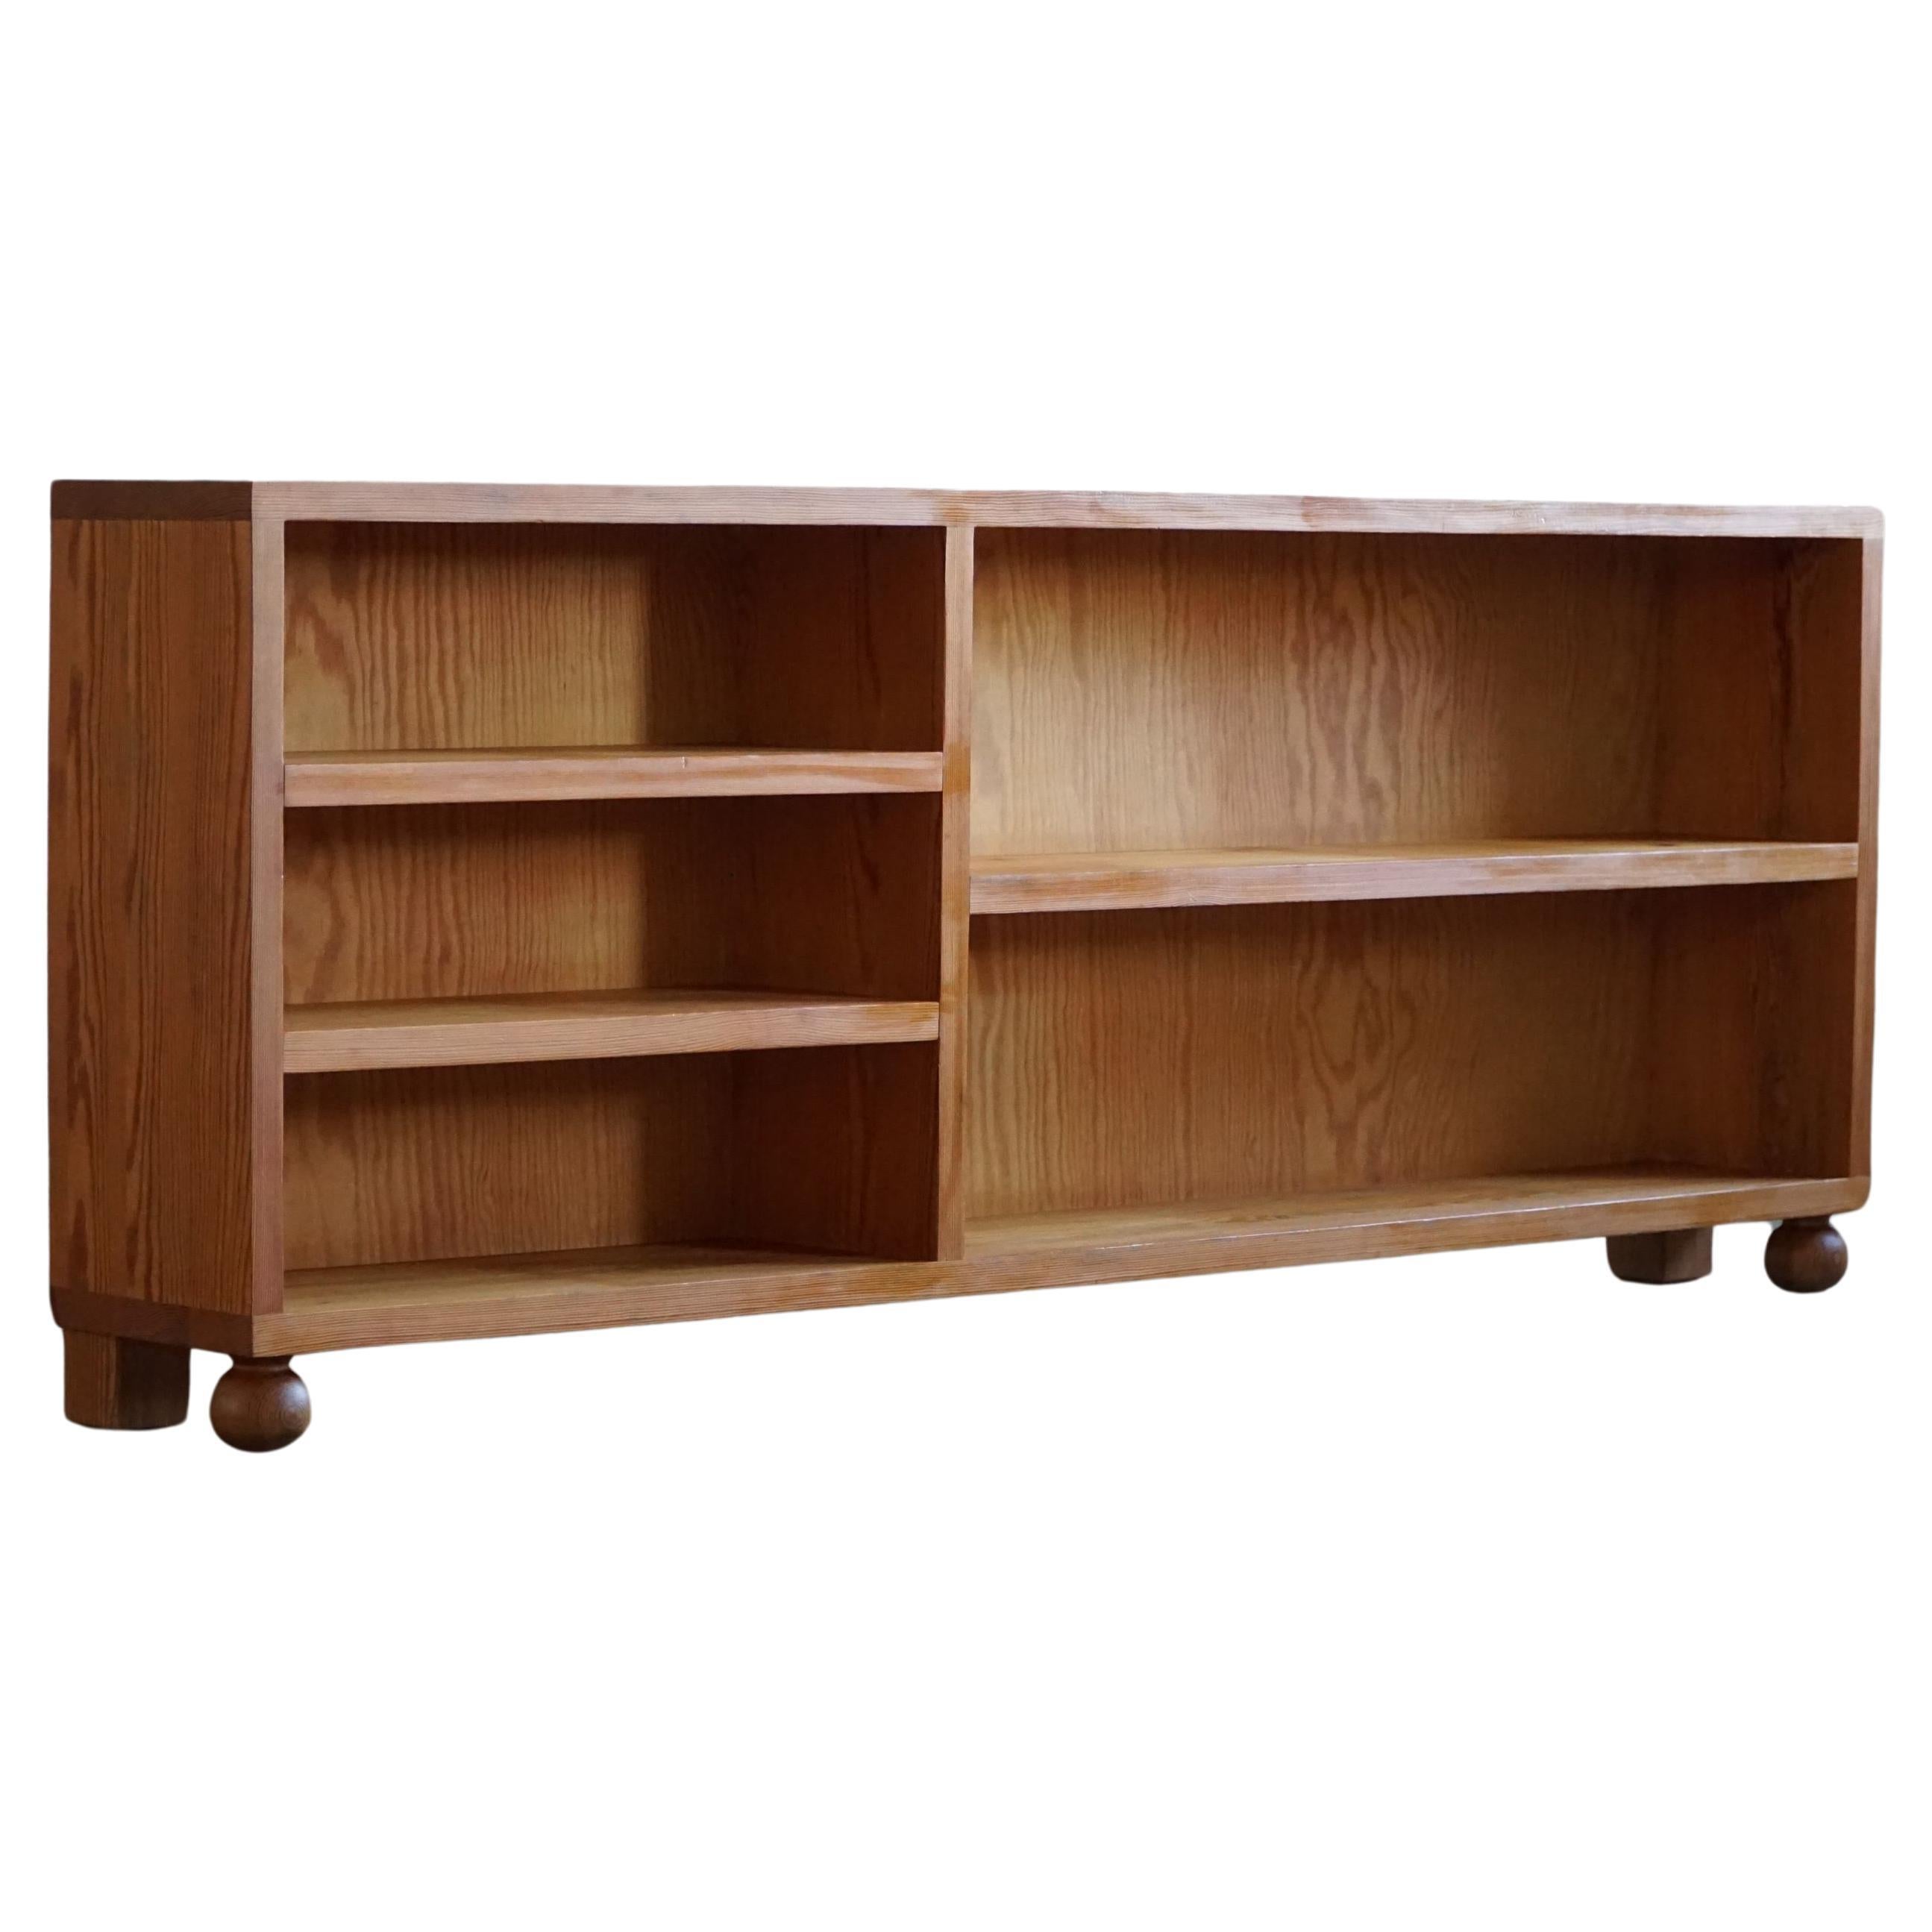 Mid Century Modern, Solid Pine Shelf, Made by A Danish Cabinetmaker, 1970s For Sale